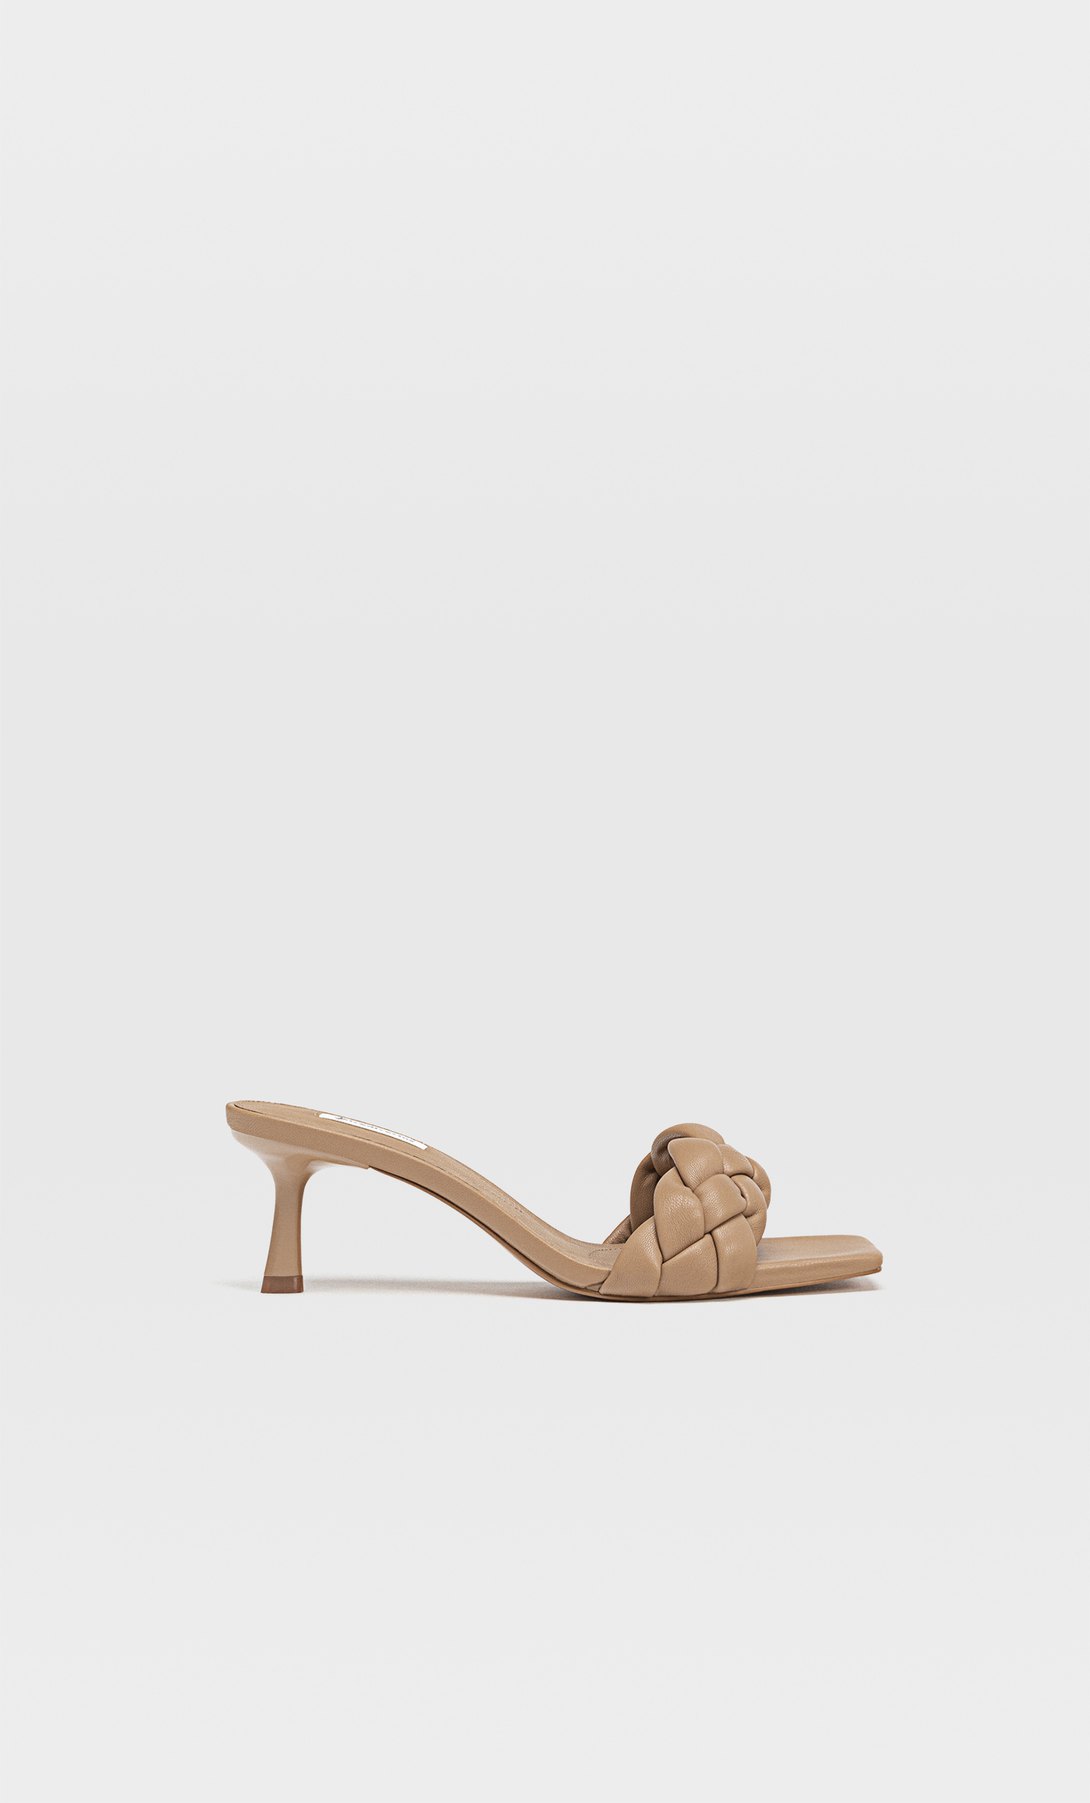 STR_Heeled sandals with padded braid detail_5